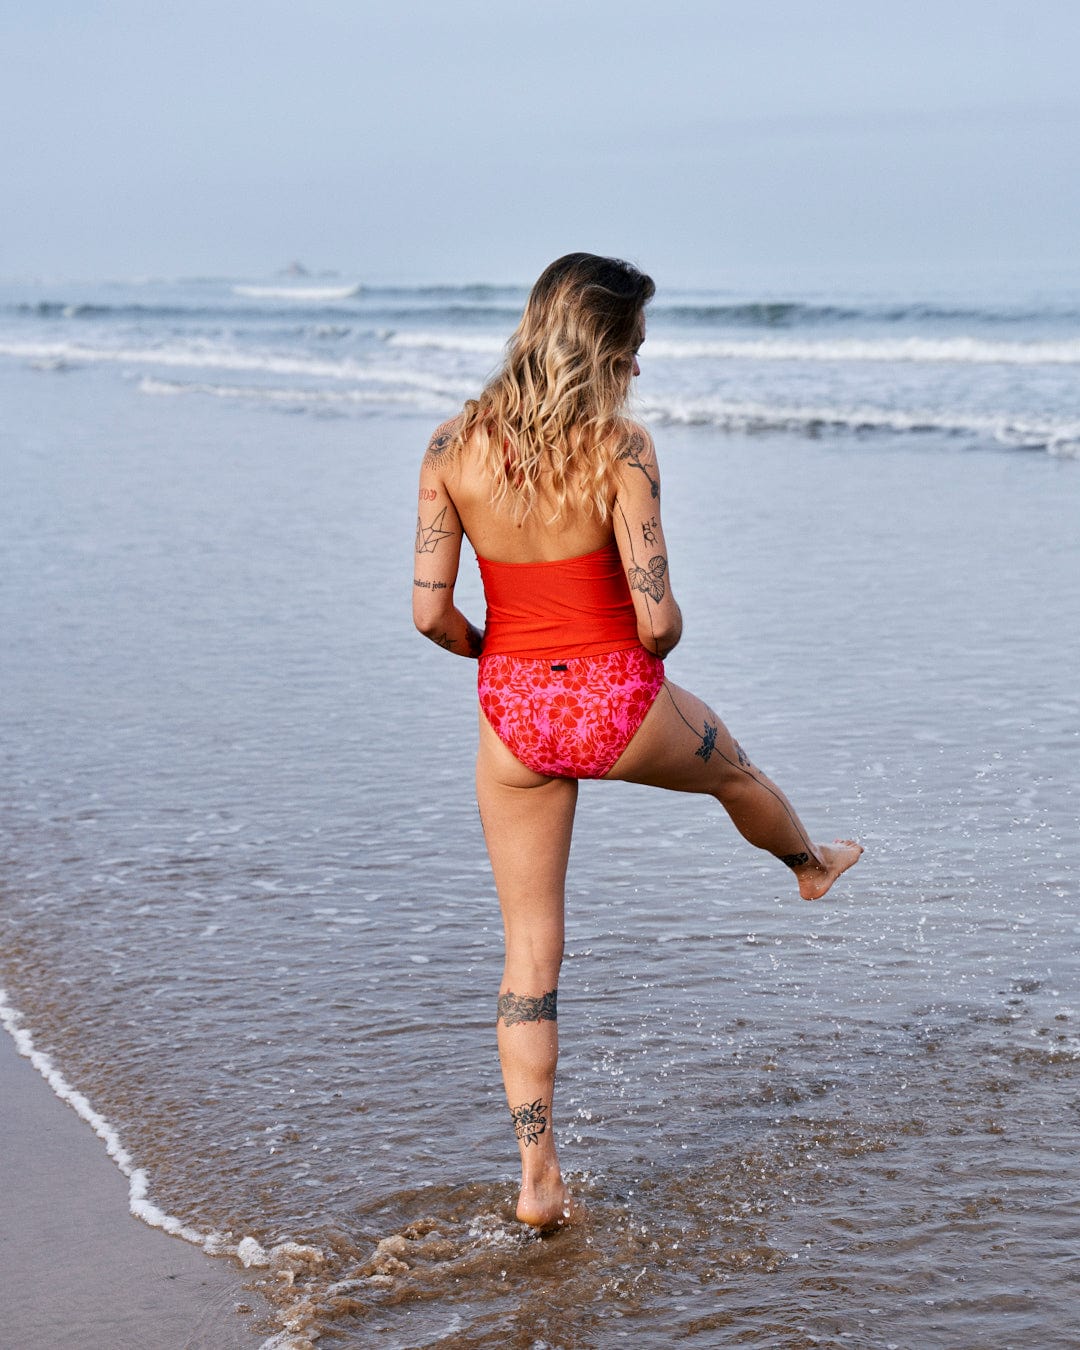 A woman in Saltrock's Caeley - Recycled Womens Hibiscus Bikini Bottoms in Pink walking into the ocean, her back to the camera, showing off various tattoos, with her foot kicking up water.